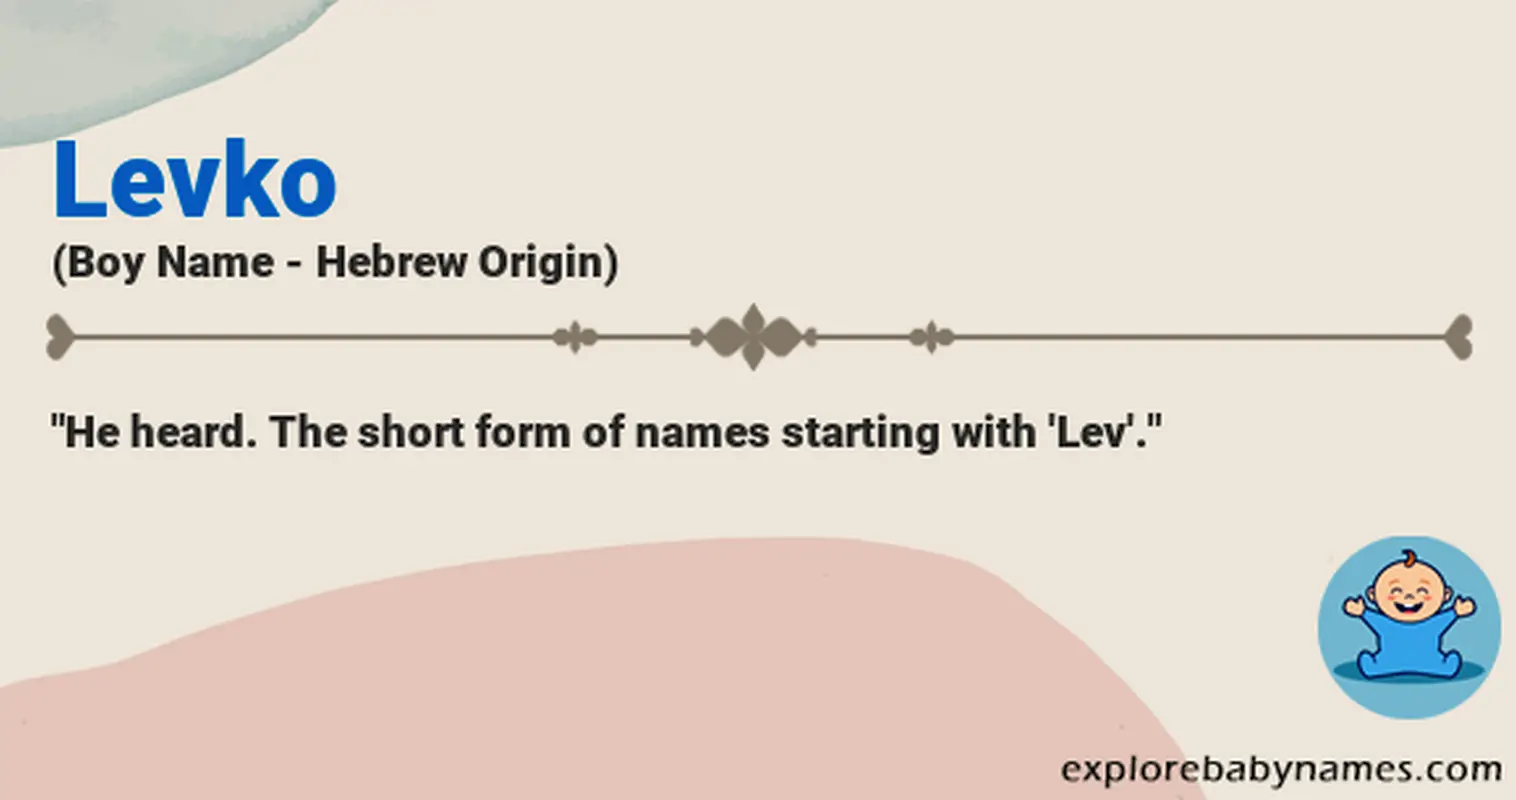 Meaning of Levko